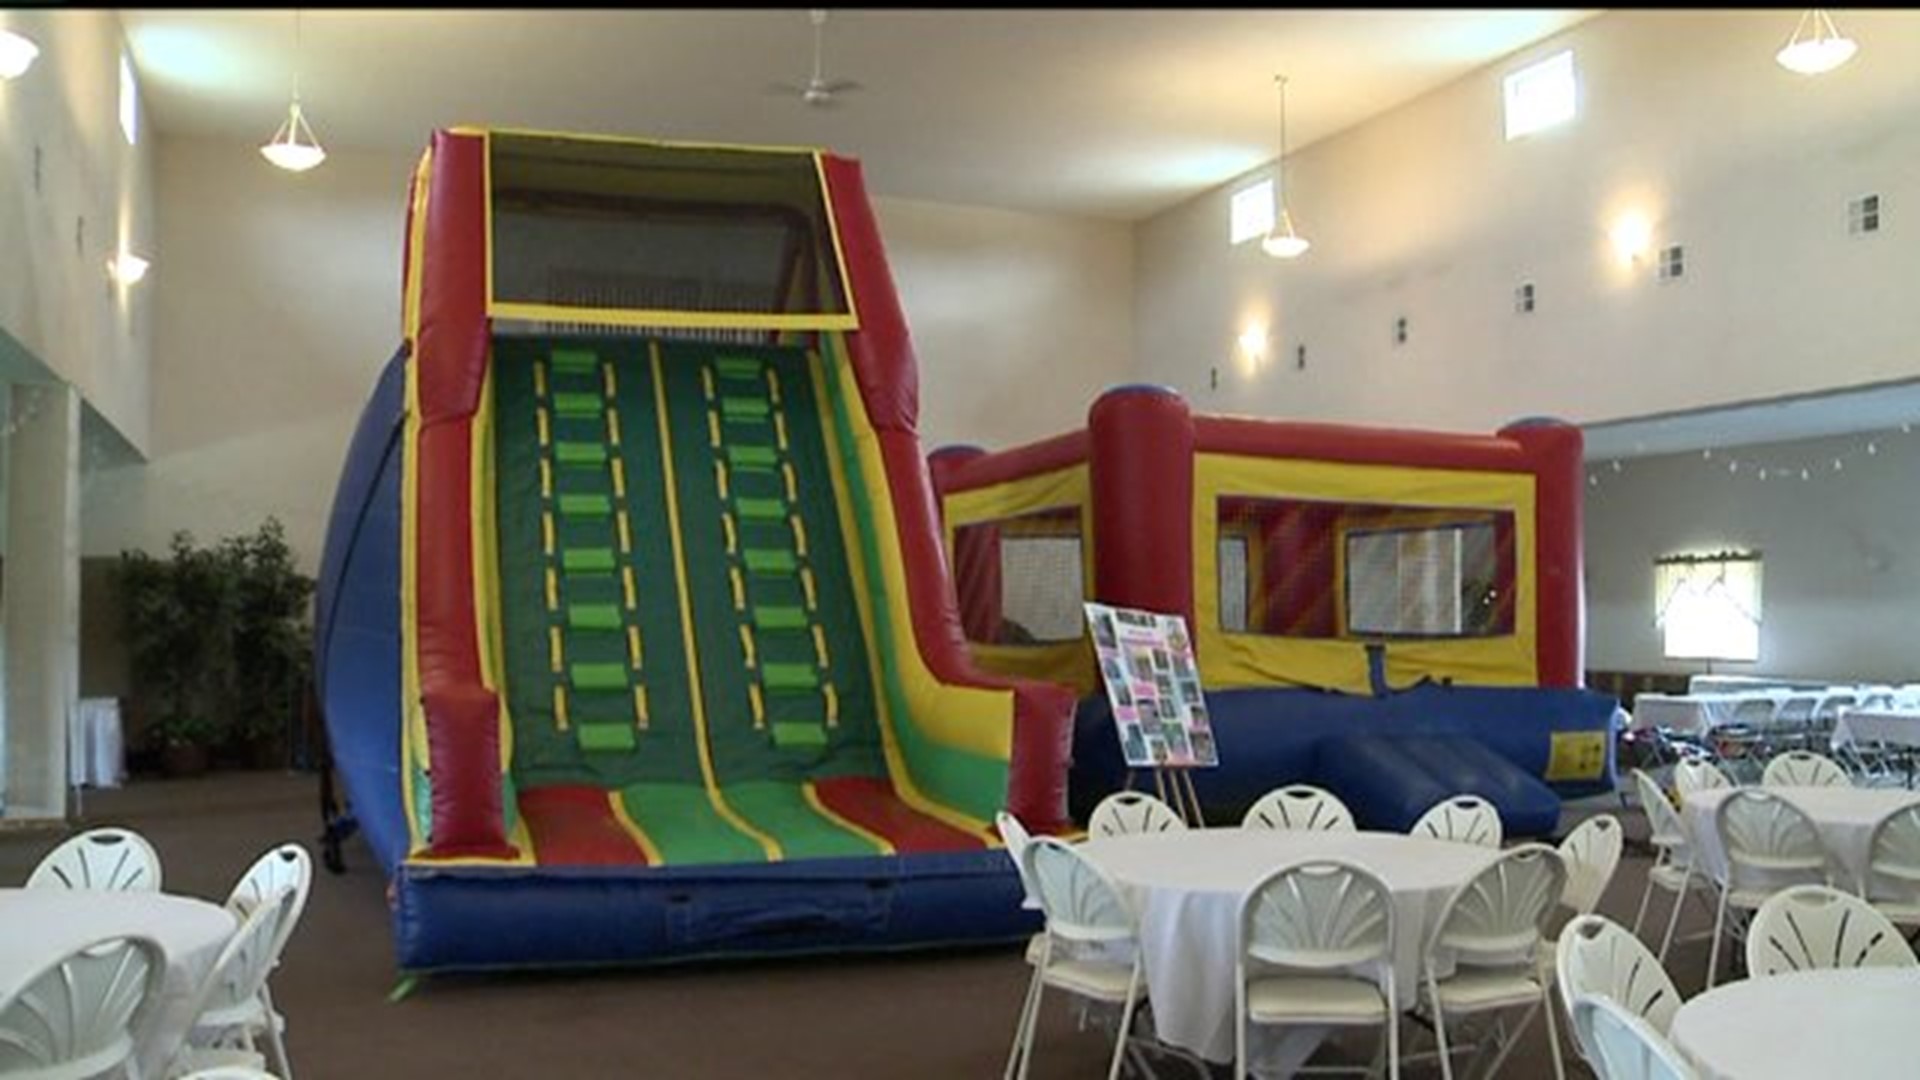 Local entertainment company owner says to leave bounce houses to the professionals